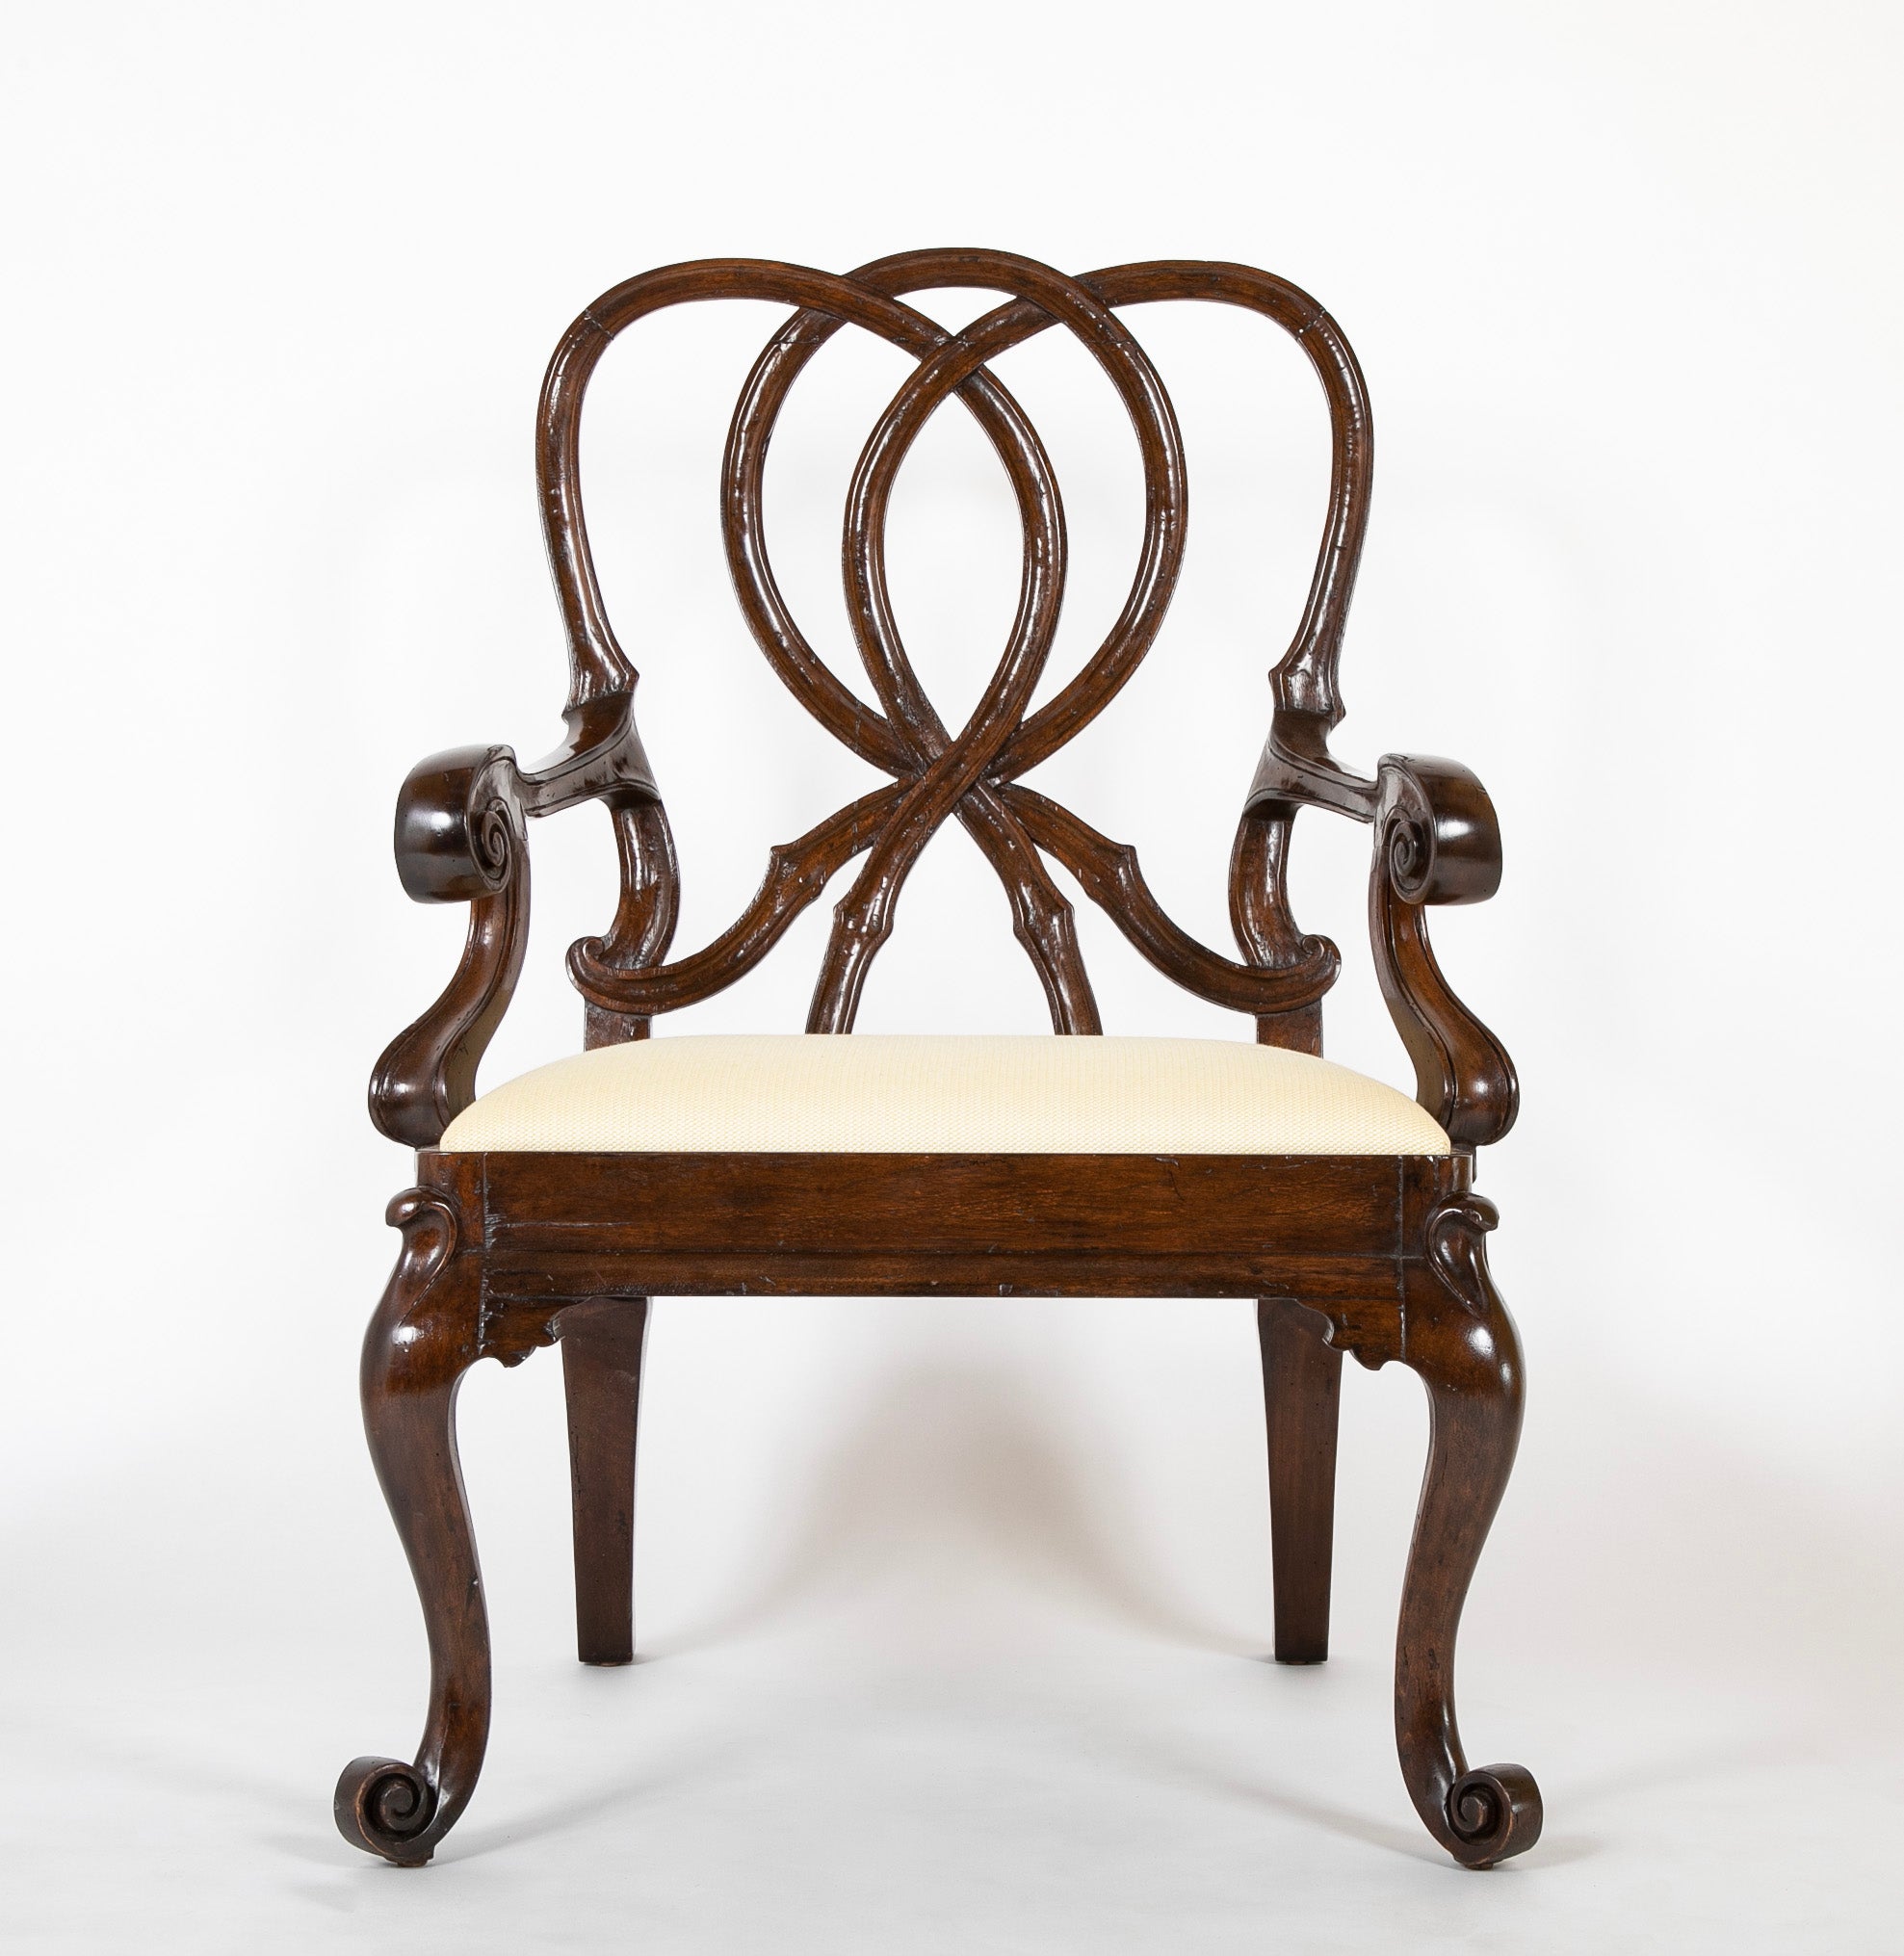 A Pair of Venetian Rococo Style Walnut Armchairs